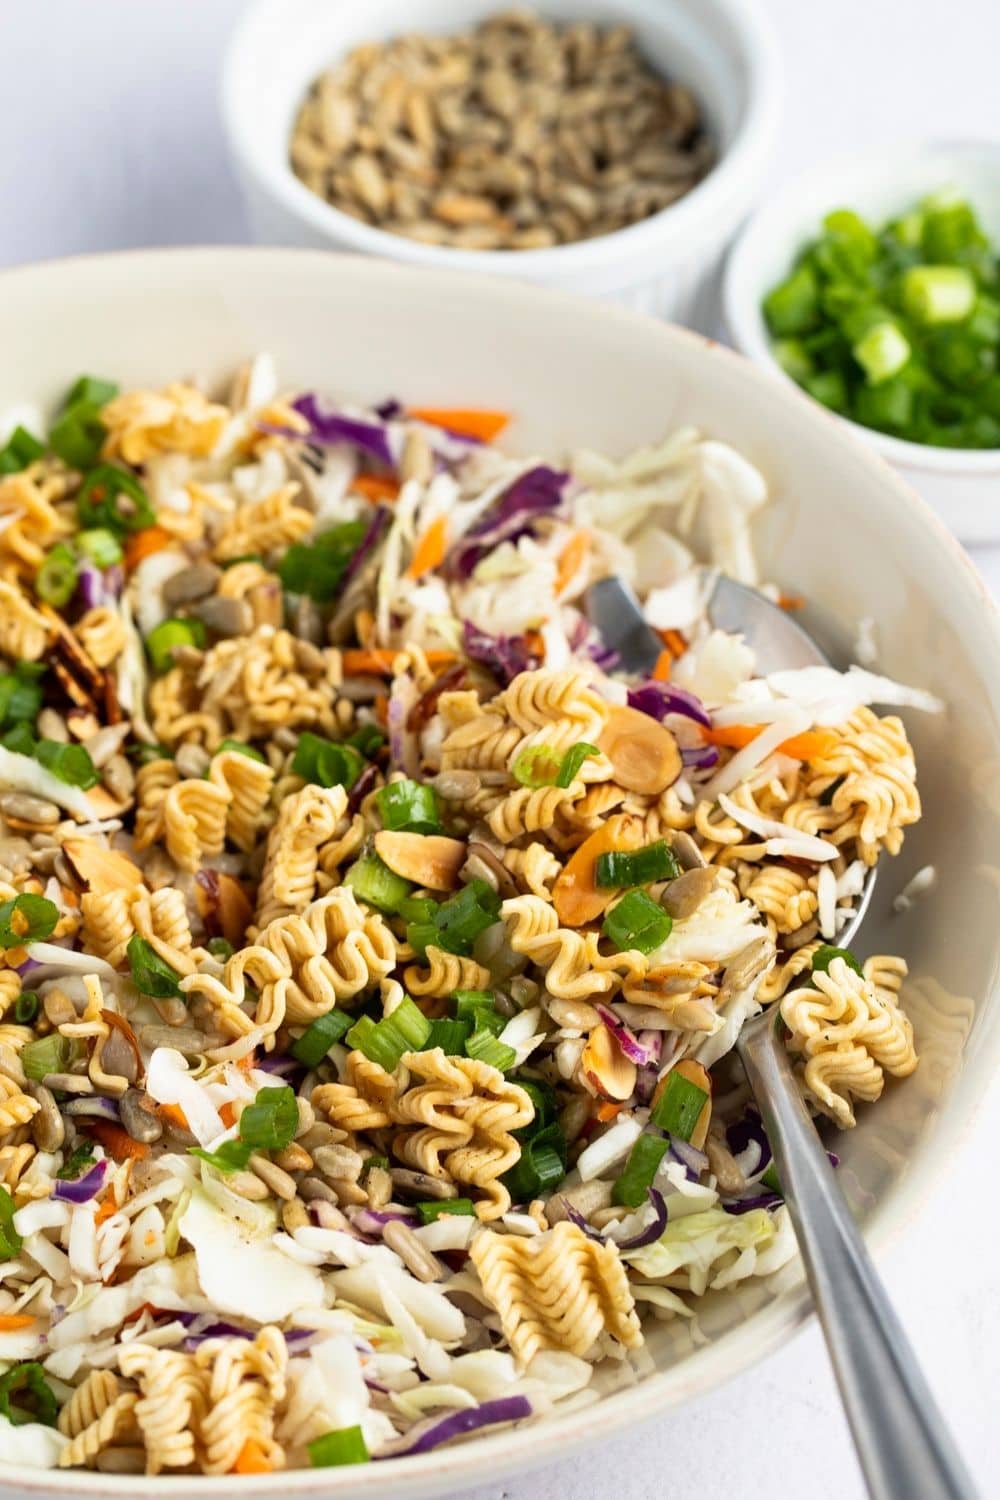 Ramen noodle salad with shredded cabbage, carrots, almond slivers and sunflower seeds.